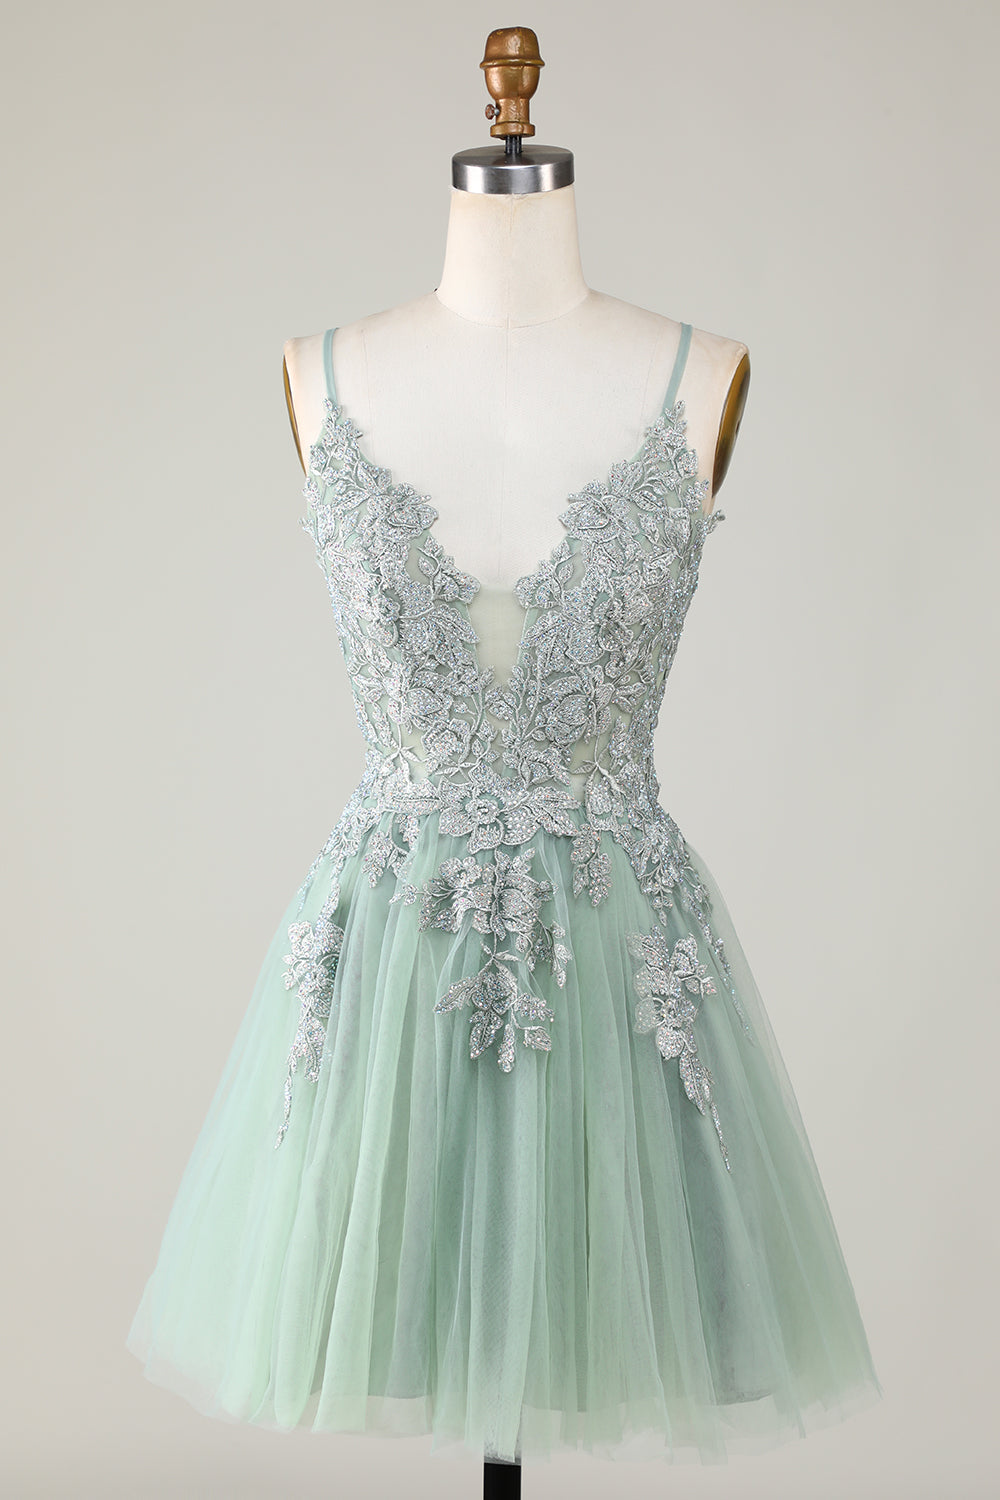 Stylish Green A Line Spaghetti Straps Short Homecoming Dress with Appliques